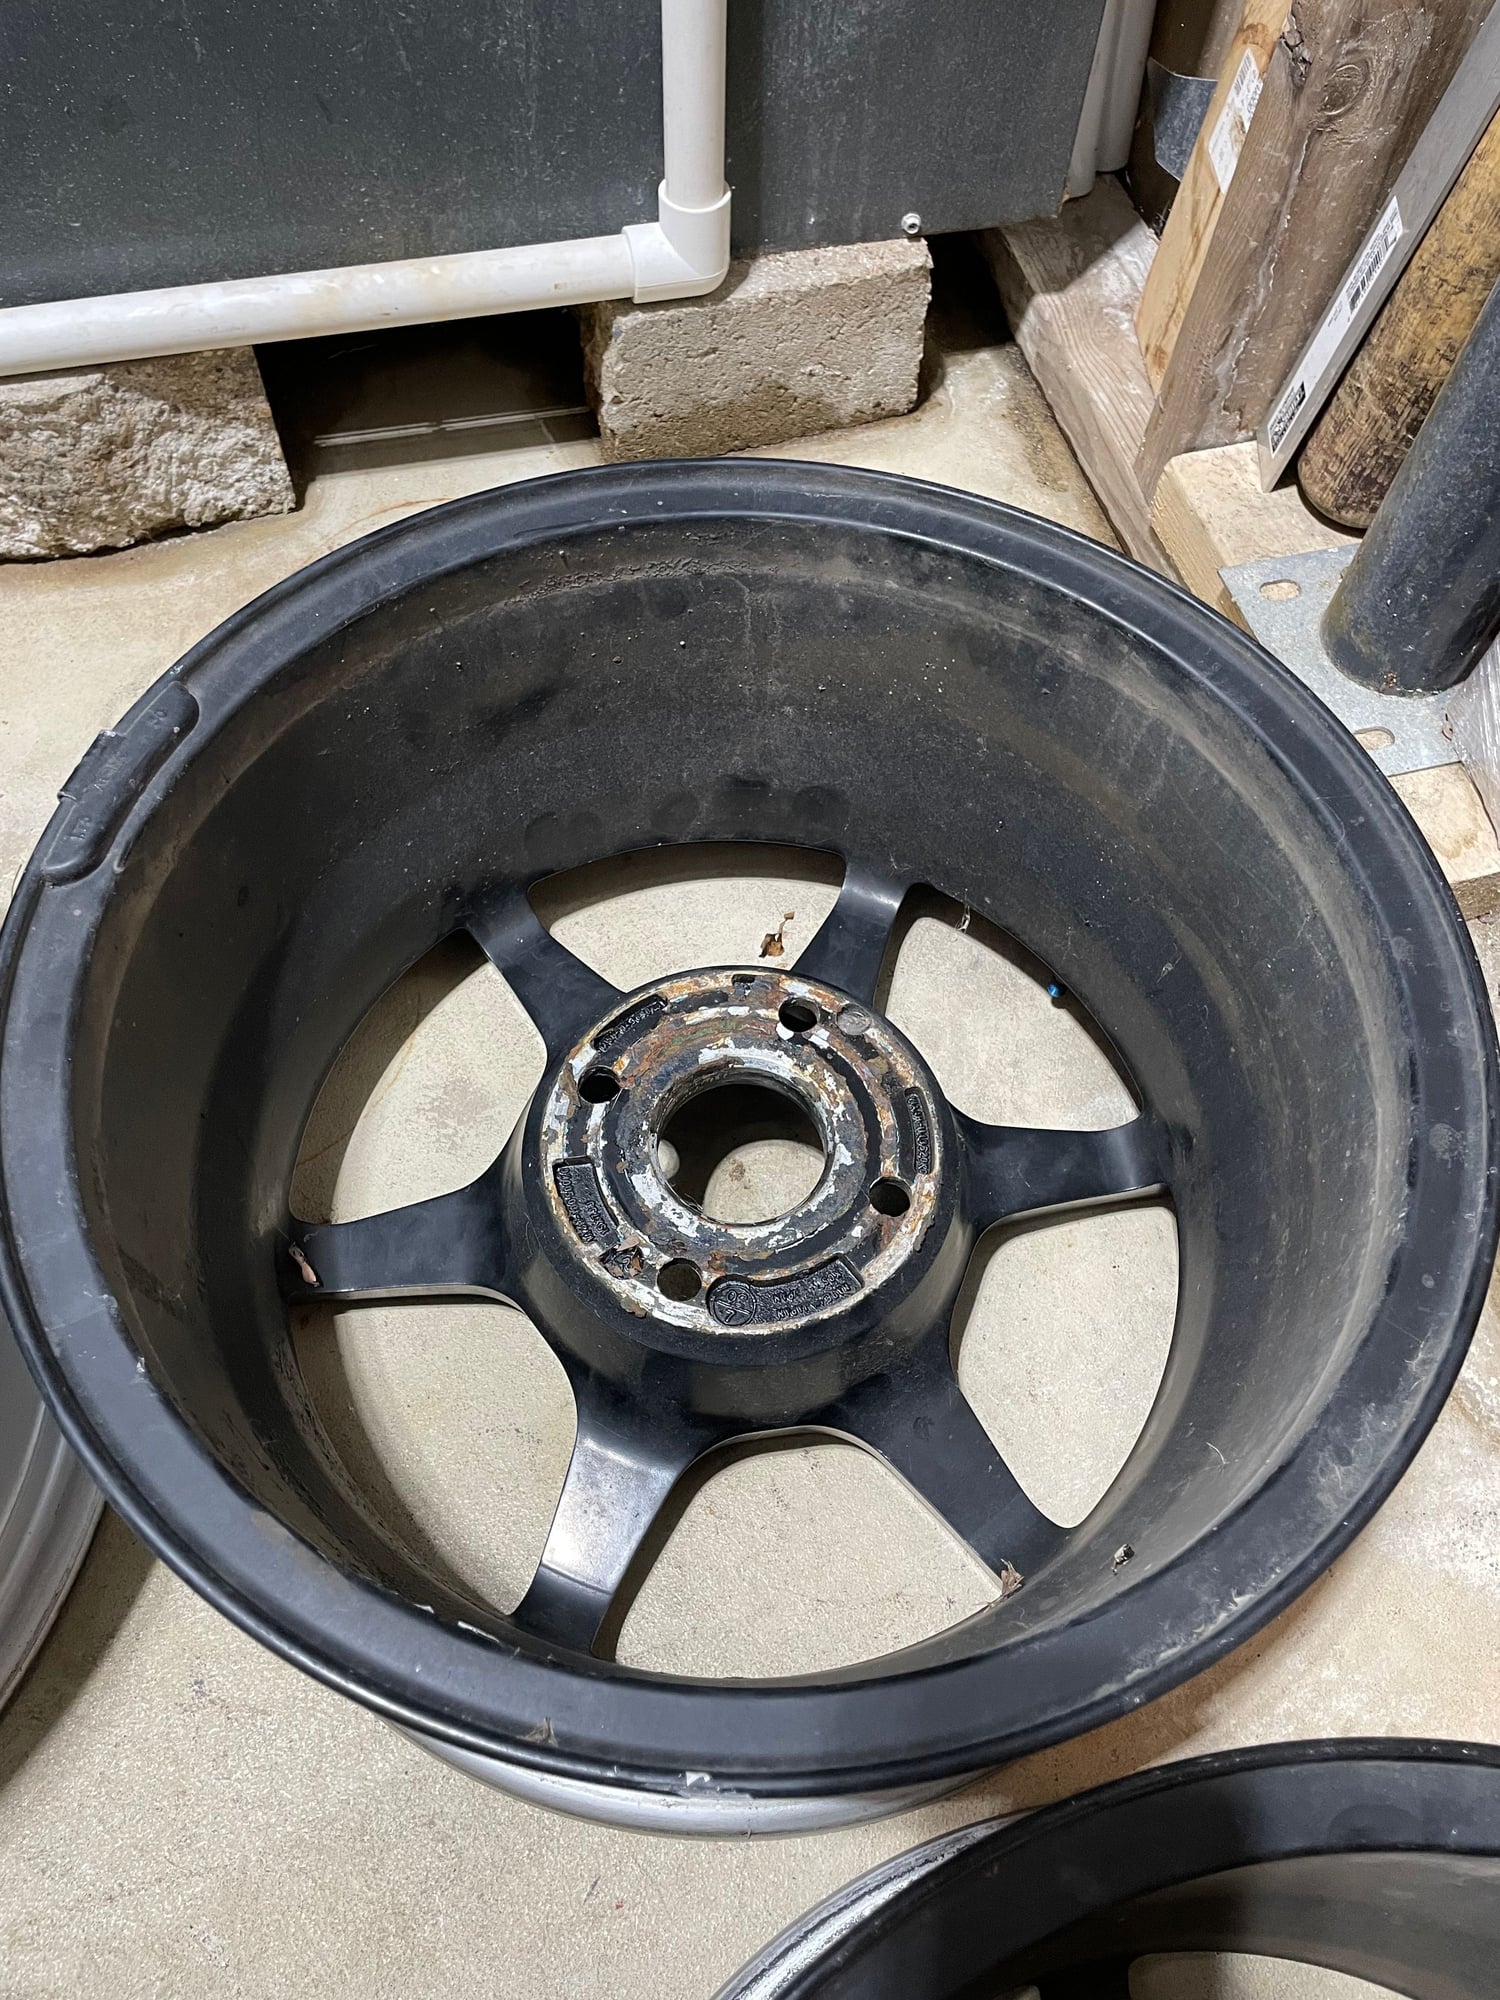 Wheels and Tires/Axles - Kosei K1 4X110 15X7 et17 - Used - 1978 to 1985 Mazda RX-7 - Minot, ND 58703, United States